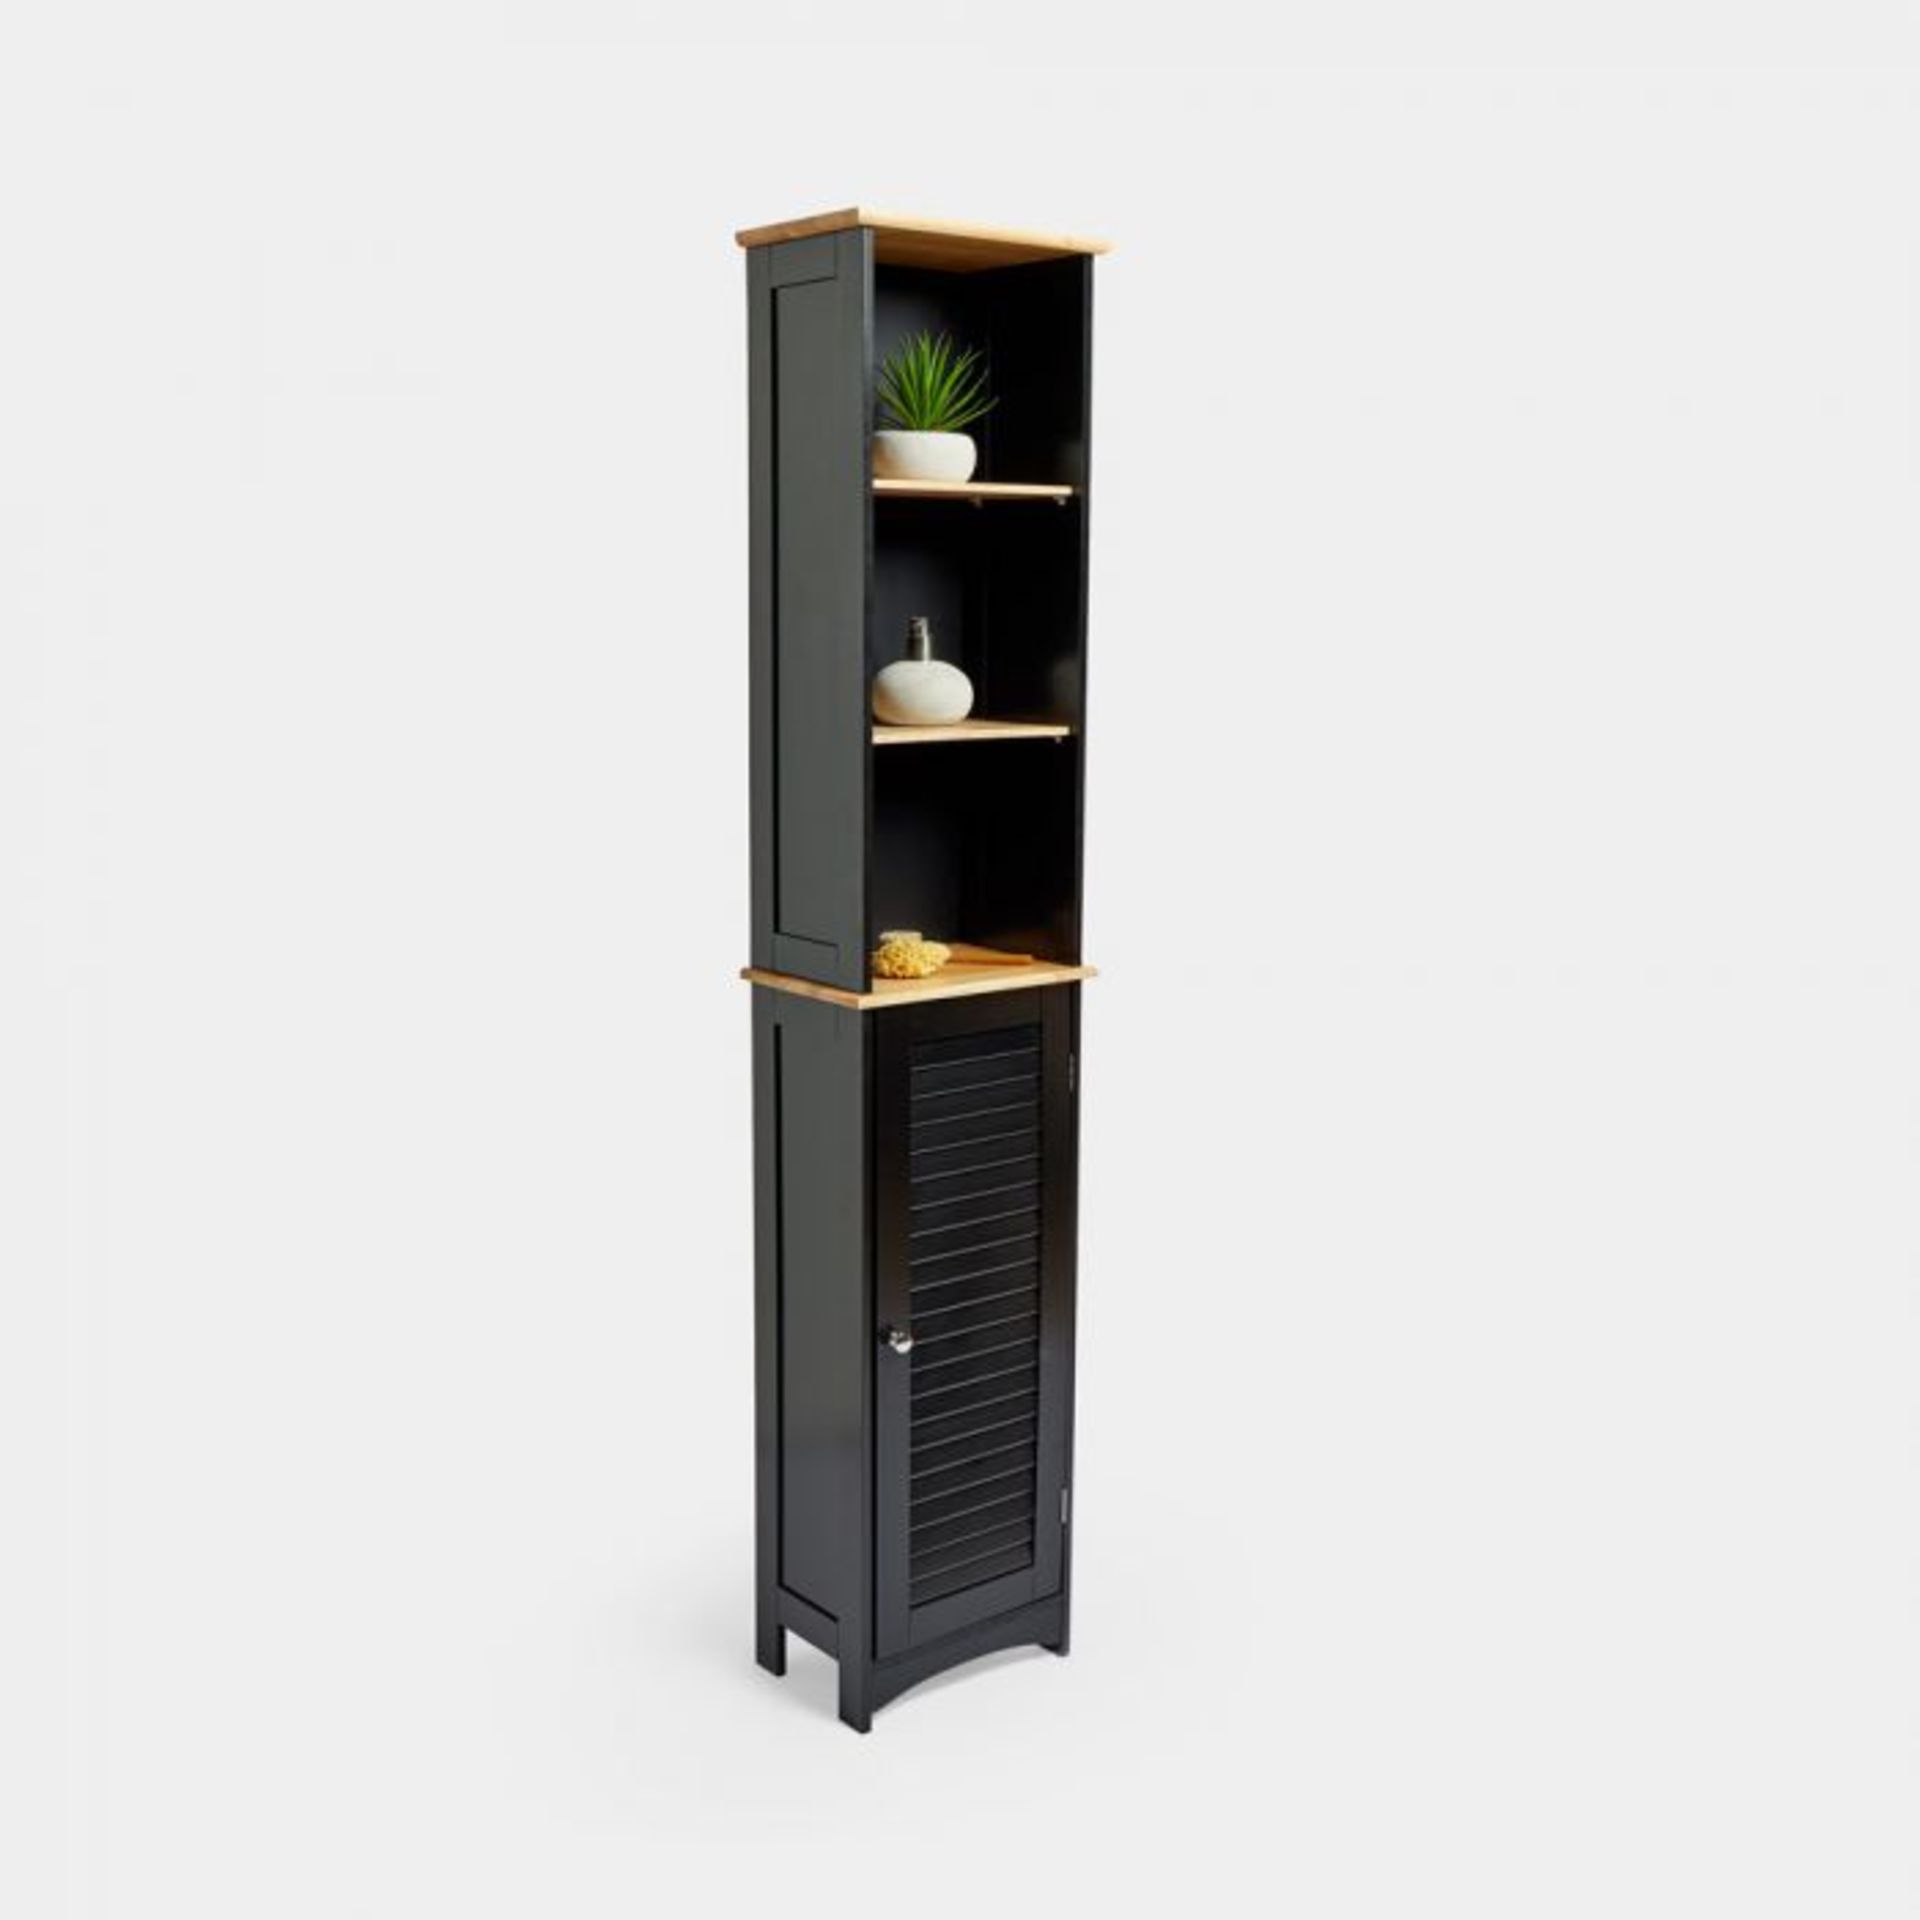 Canterbury Tallboy Bathroom Cabinet. The perfect addition to your bathroom whether it be large or